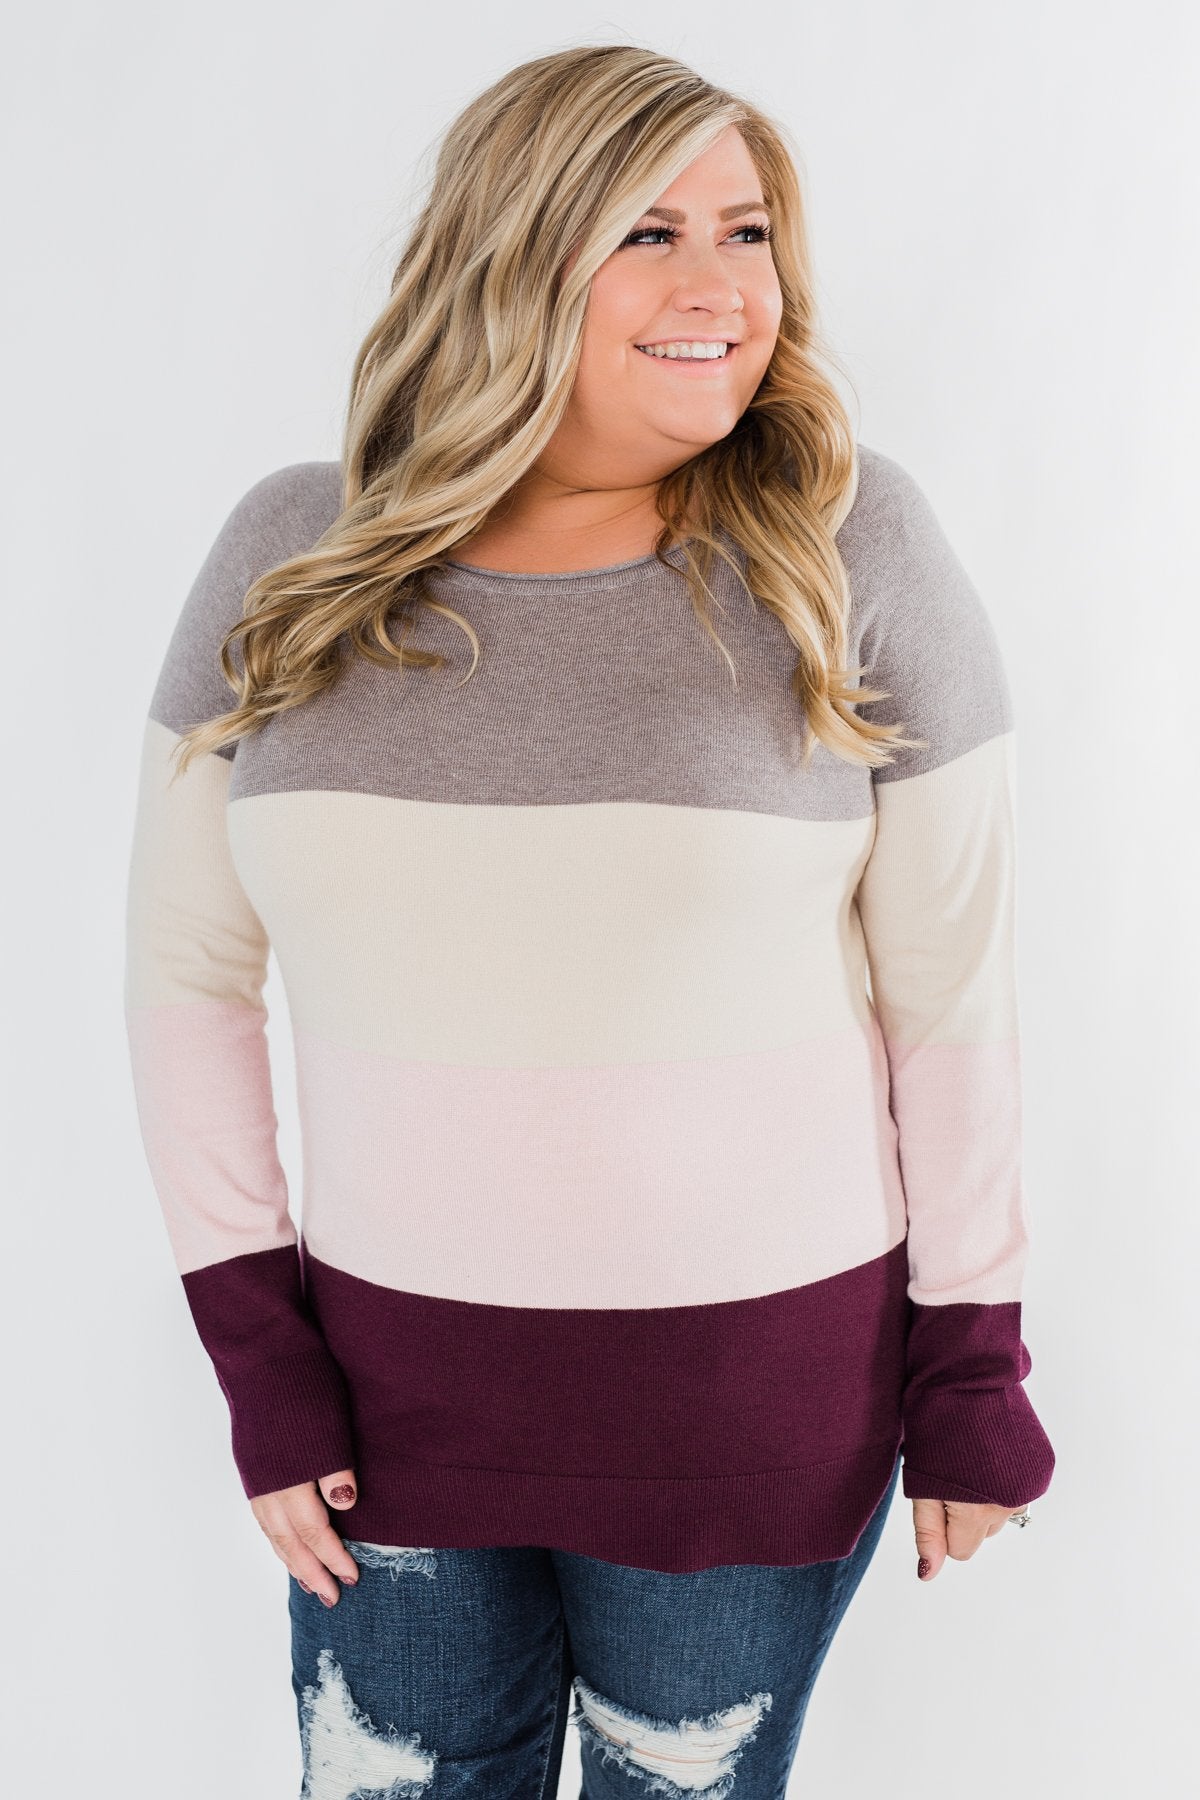 Be Yourself Color Block Sweater- Grey, Cream, & Blush